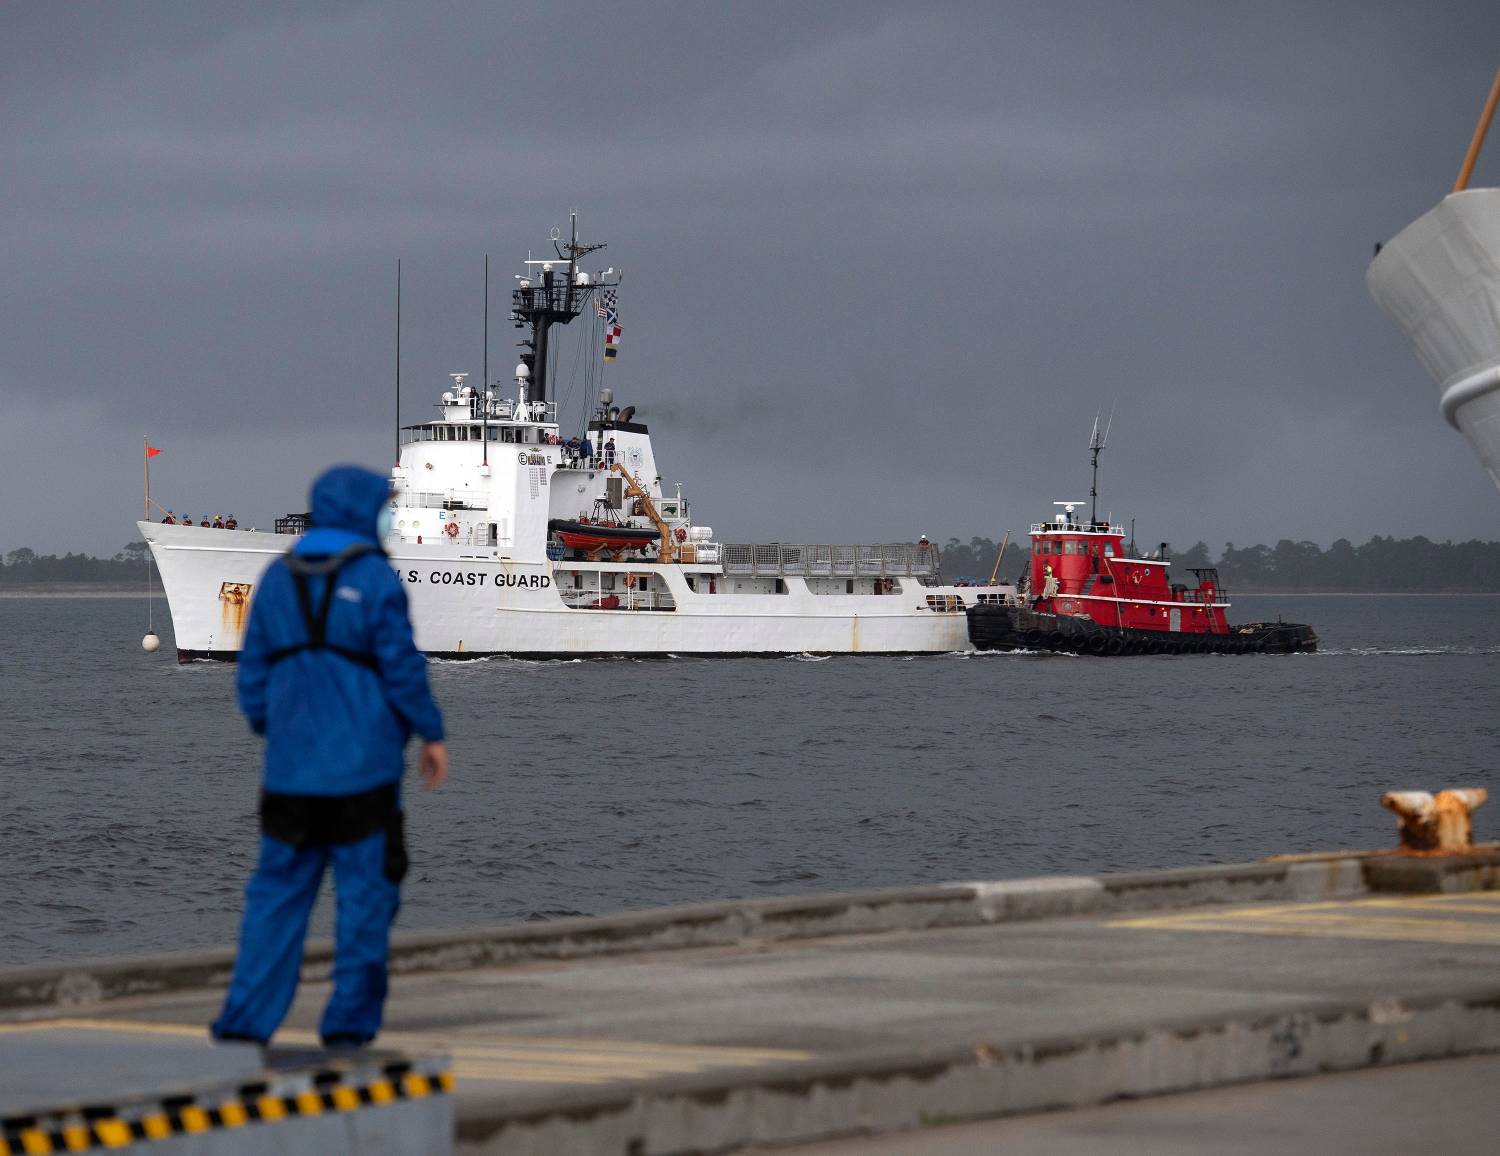 The U.S Coast Guard Cutter Diligence (WMEC-616) arrives at its new homeport at Naval Air Station Pensacola on a stormy day Monday, July 27, 2020. The 210-foot Reliance-class cutter joins the cutters Decisive and the Dauntless currently calling Pensacola home.Uscg Homeport Diligence